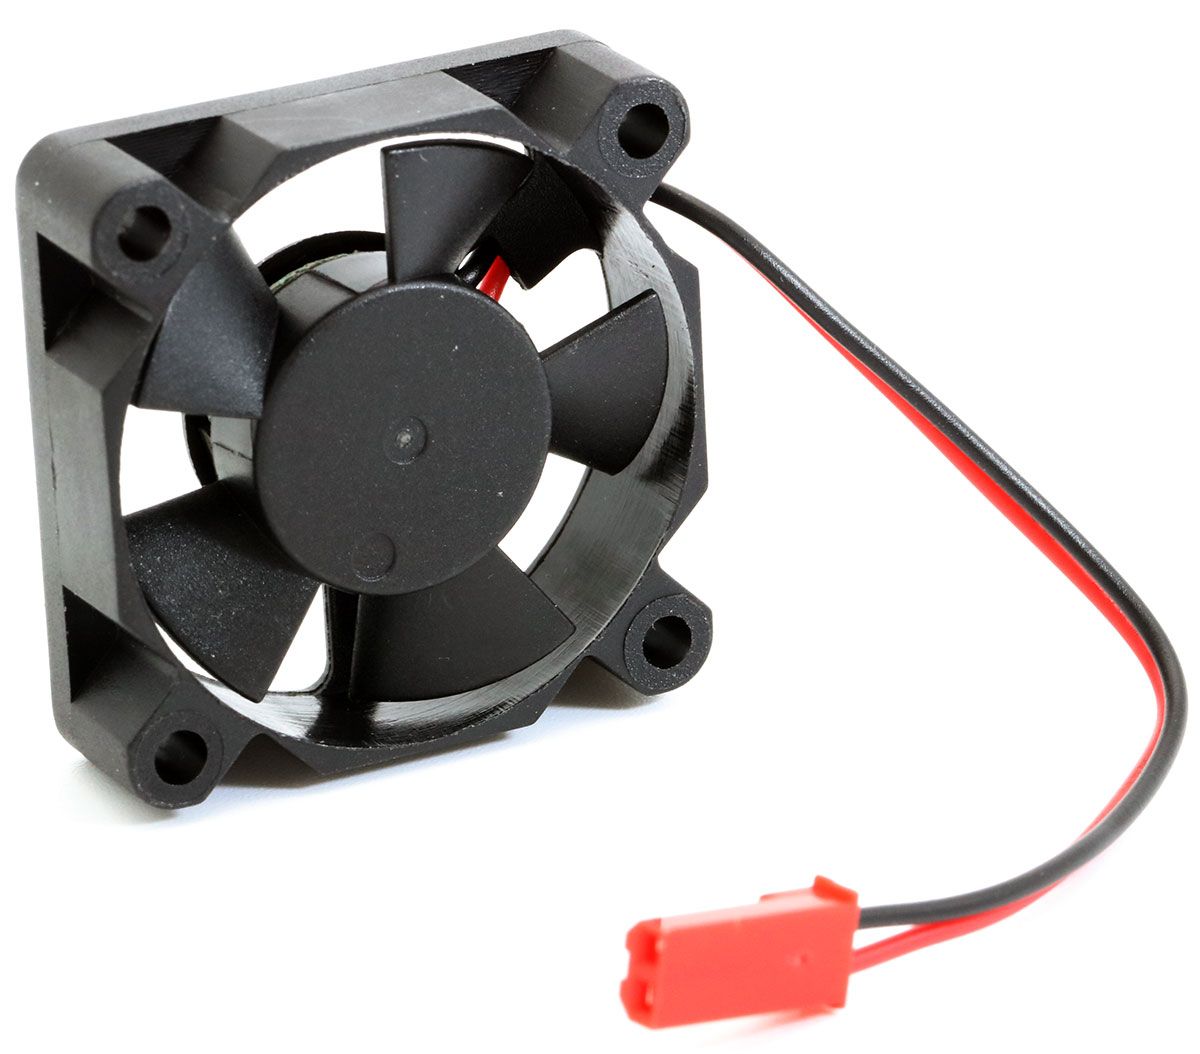 Picture of Power Hobby PHBPHF35 35 mm Ultra High Speed Motor & ESC Cooling Fan